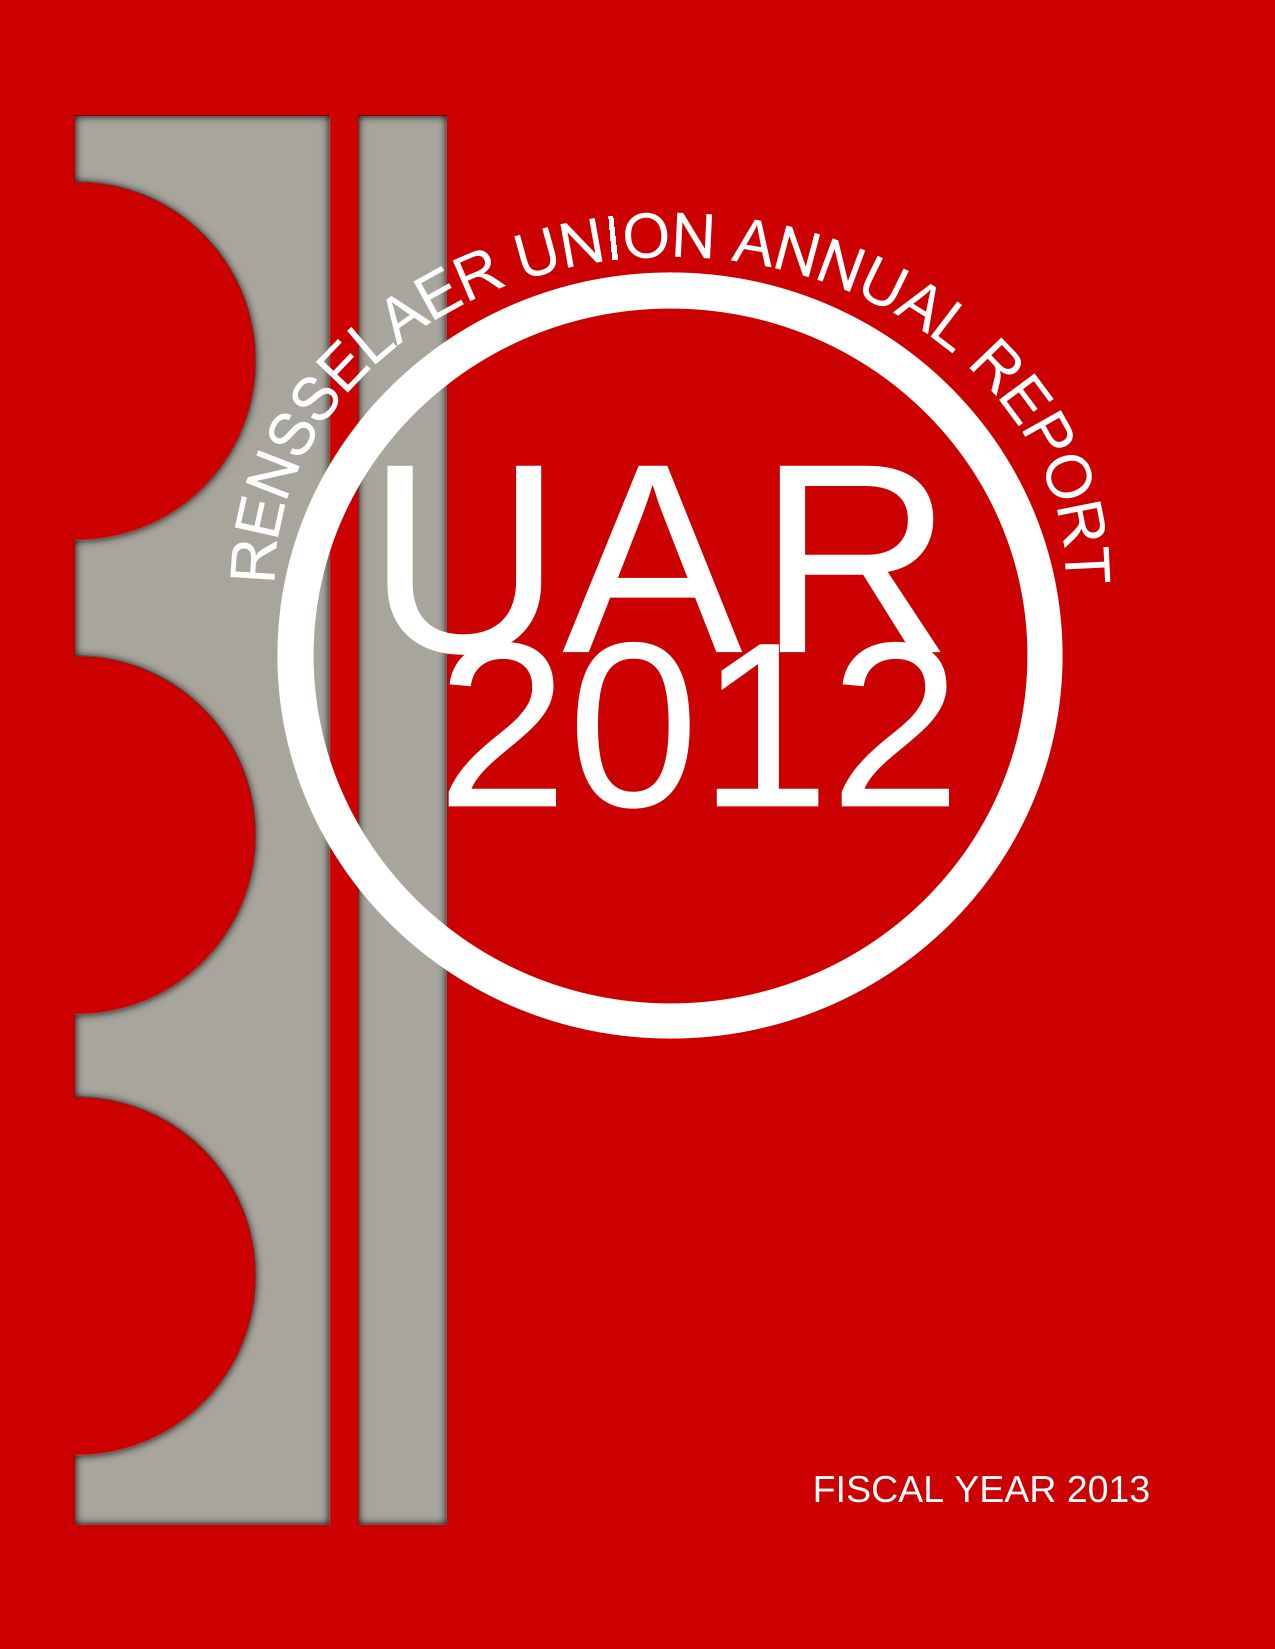 Rensselaer Union Annual Report Fiscal Year 2012-2013